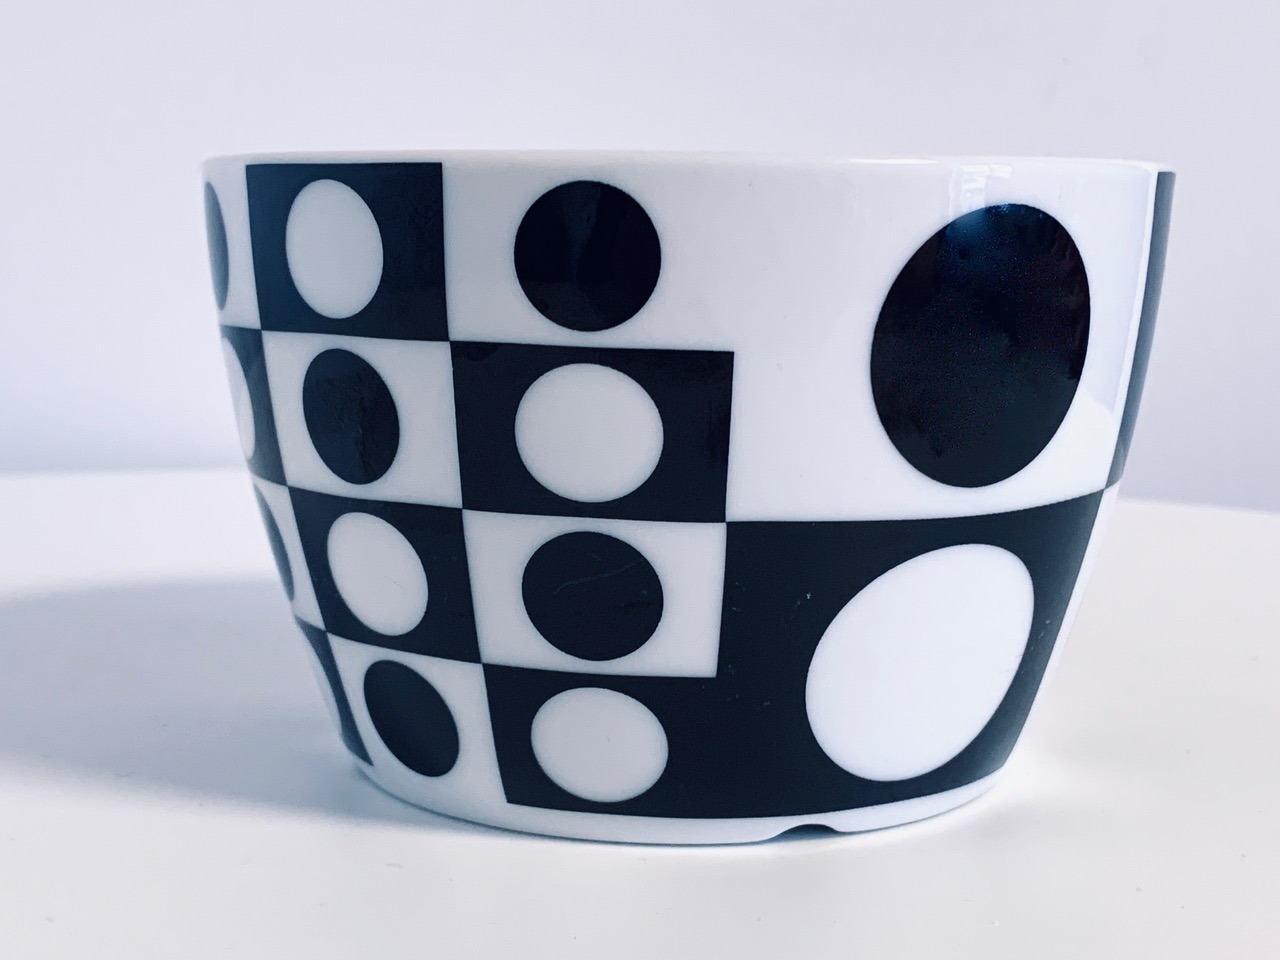 Image of the Verner Panton Menu dish black and white offered in this advertisement.